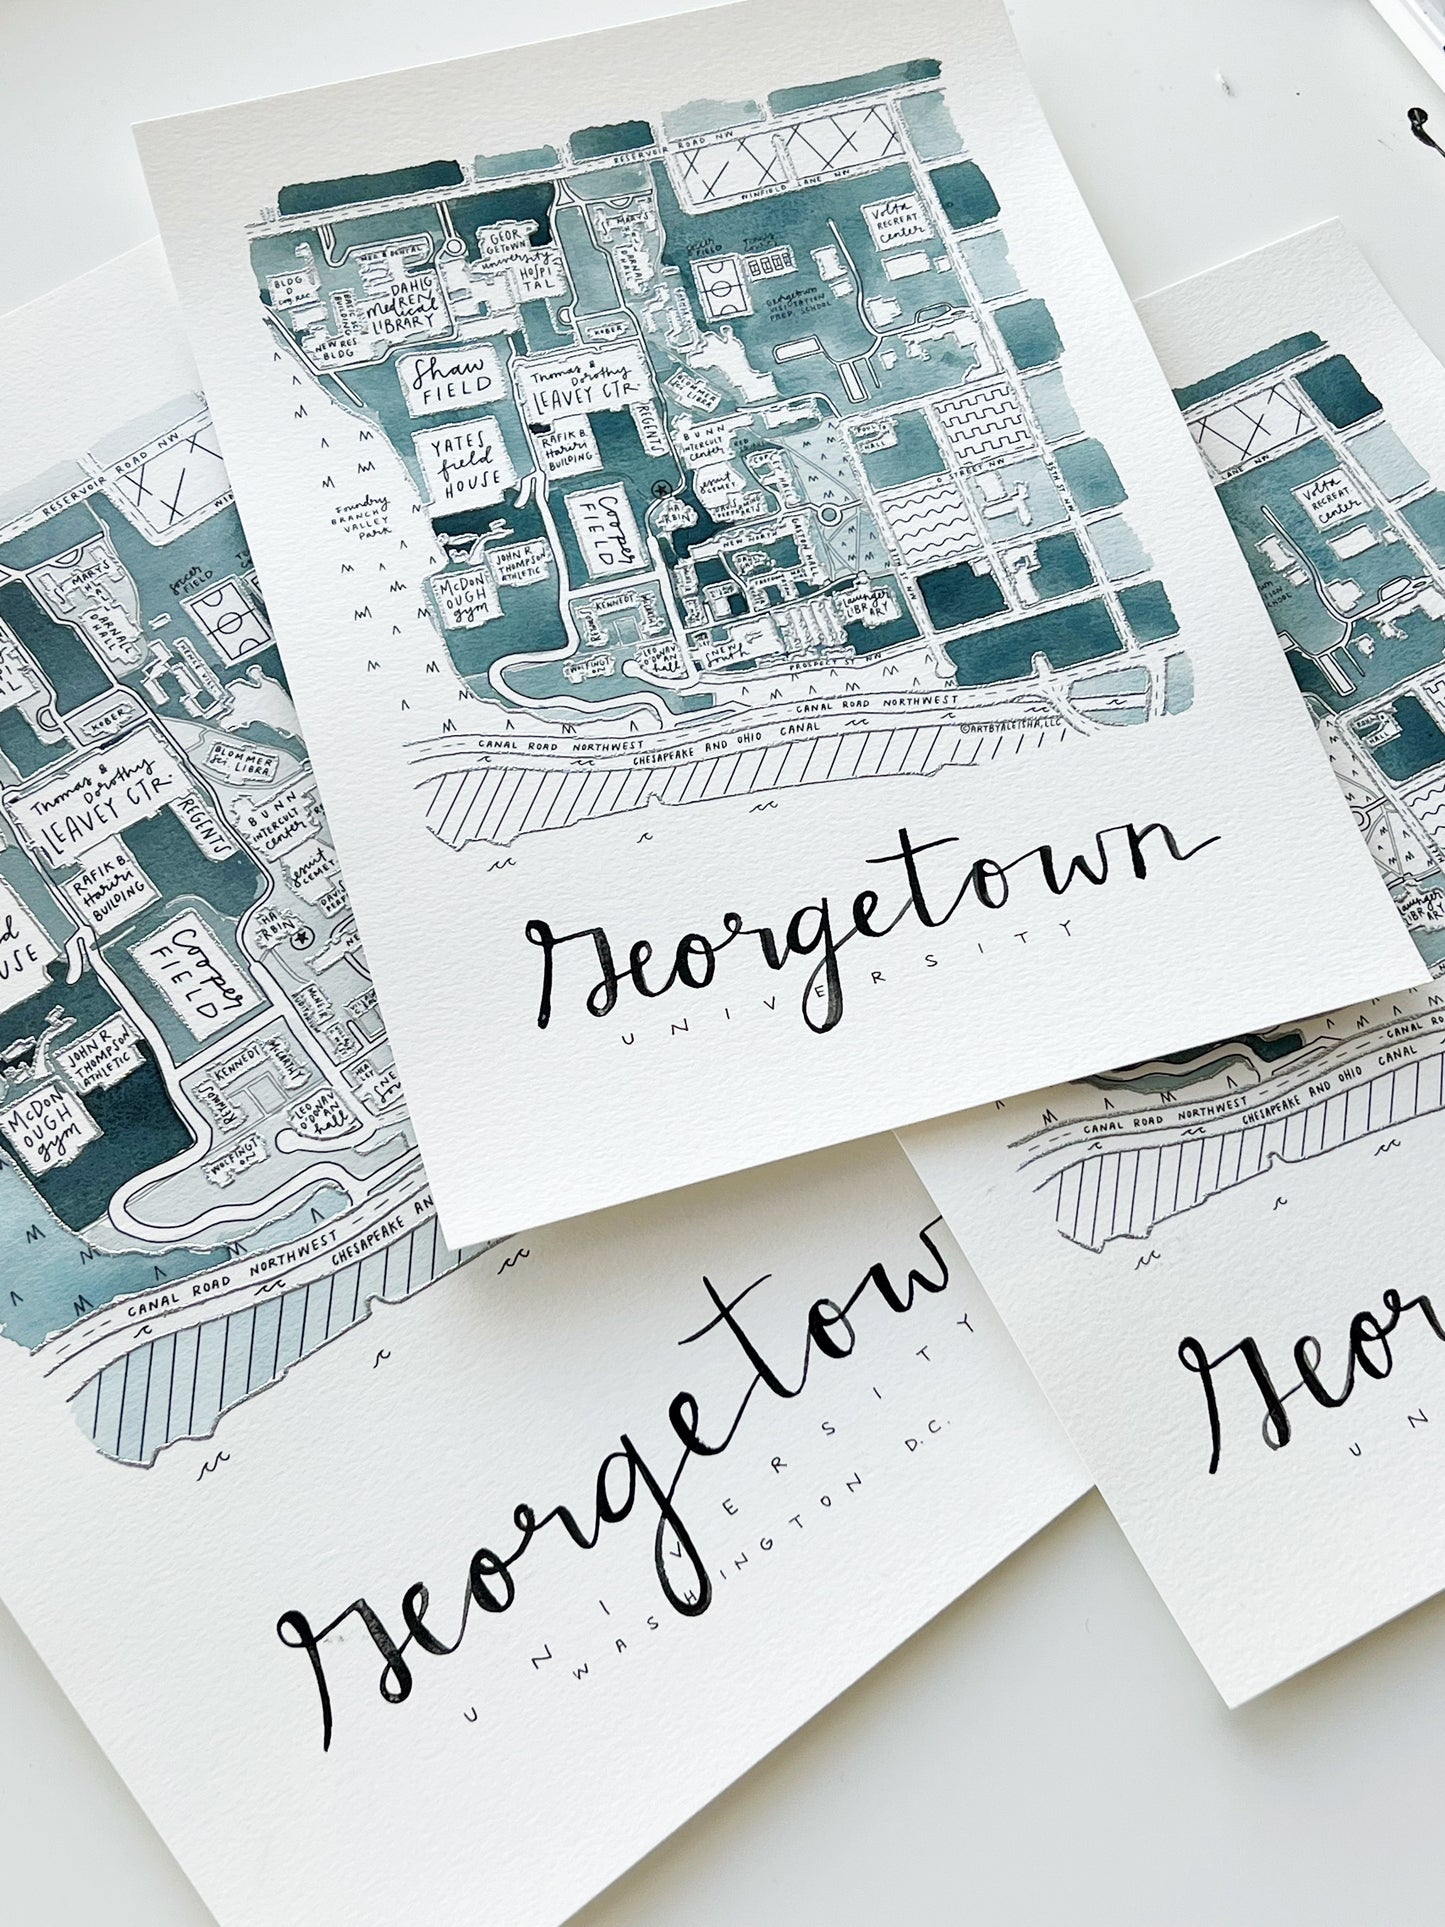 Hand Painted Georgetown University Campus Map